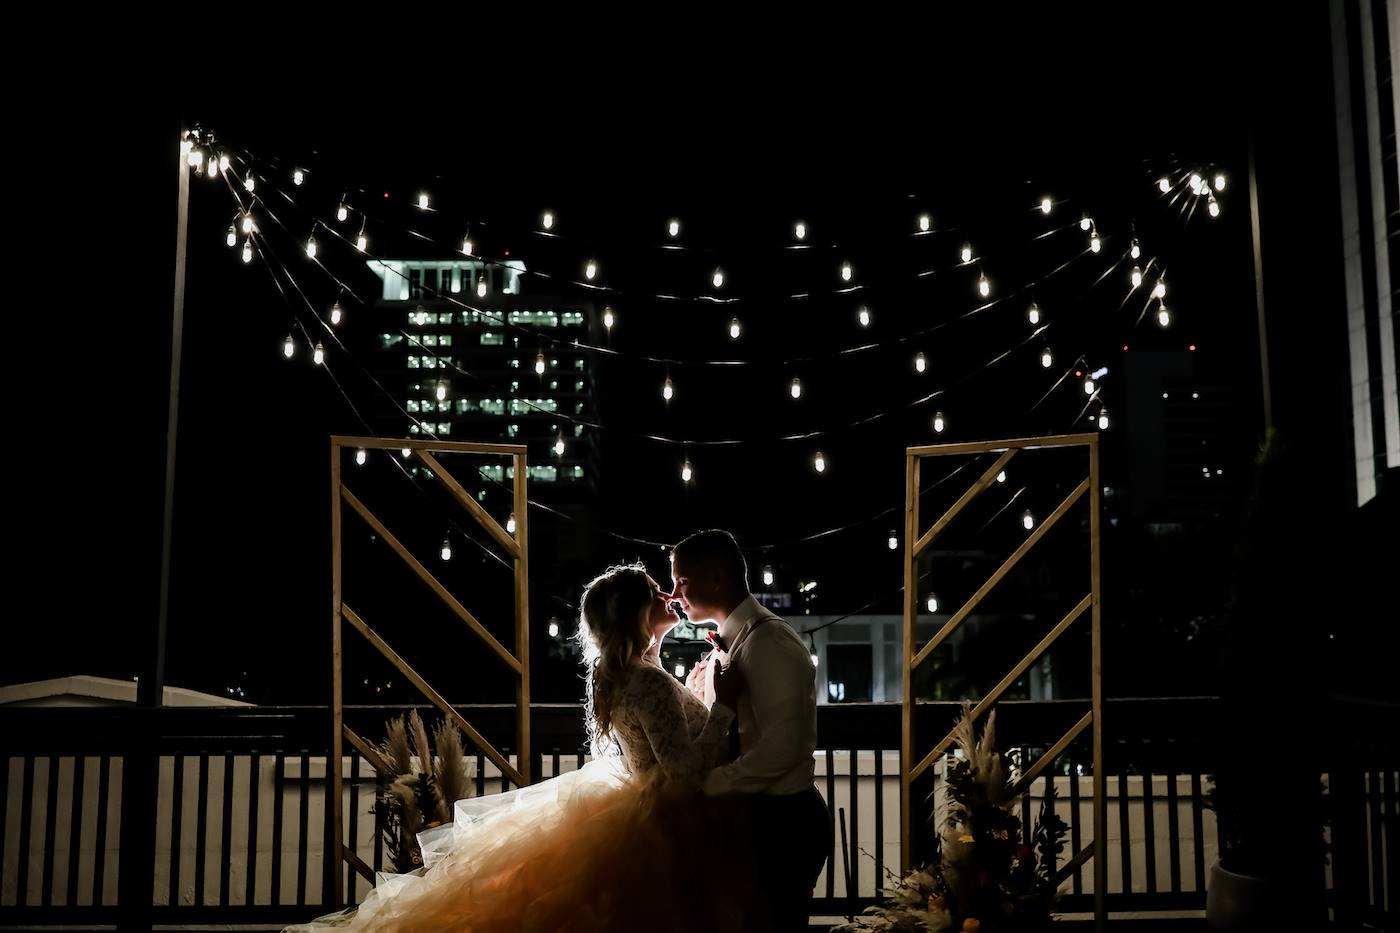 Boho Inspired Bride and Groom Silhouette Portrait on Wedding Venue Rooftop with City Backdrop, Hanging String Lights, Geometrical Stands | Tampa Bay Wedding Planner Blue Skies Weddings and Events | Downtown St. Petersburg Wedding Photographer Lifelong Photography Studio | Unique Florida Wedding Venue Station House in DTSP